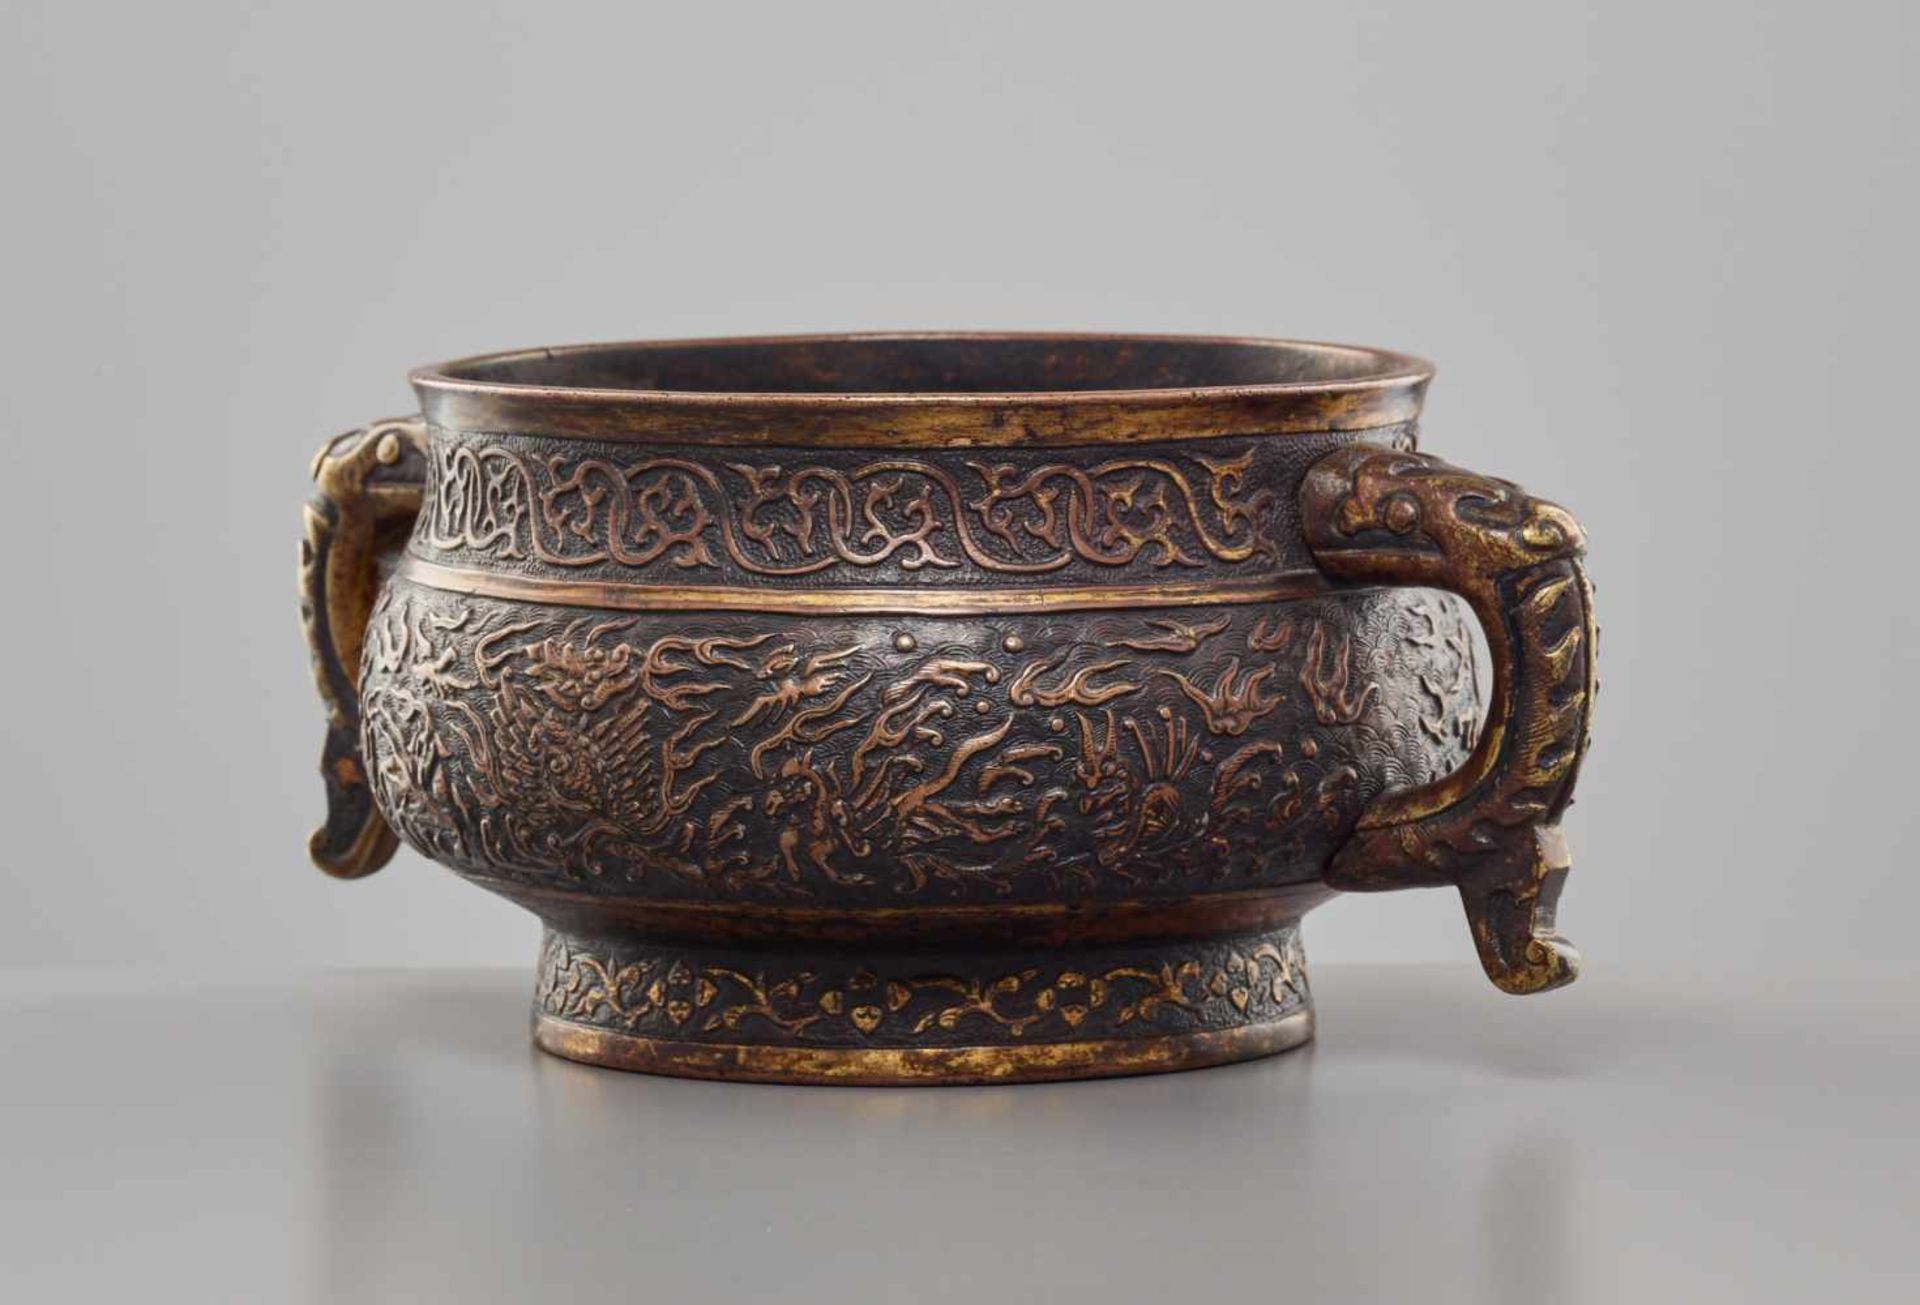 A LARGE PARCEL-GILT BRONZE CENSER, GUI, WANLI PERIOD, HU WENMING MARK THIS LOT IS PUBLISHED in - Image 5 of 13